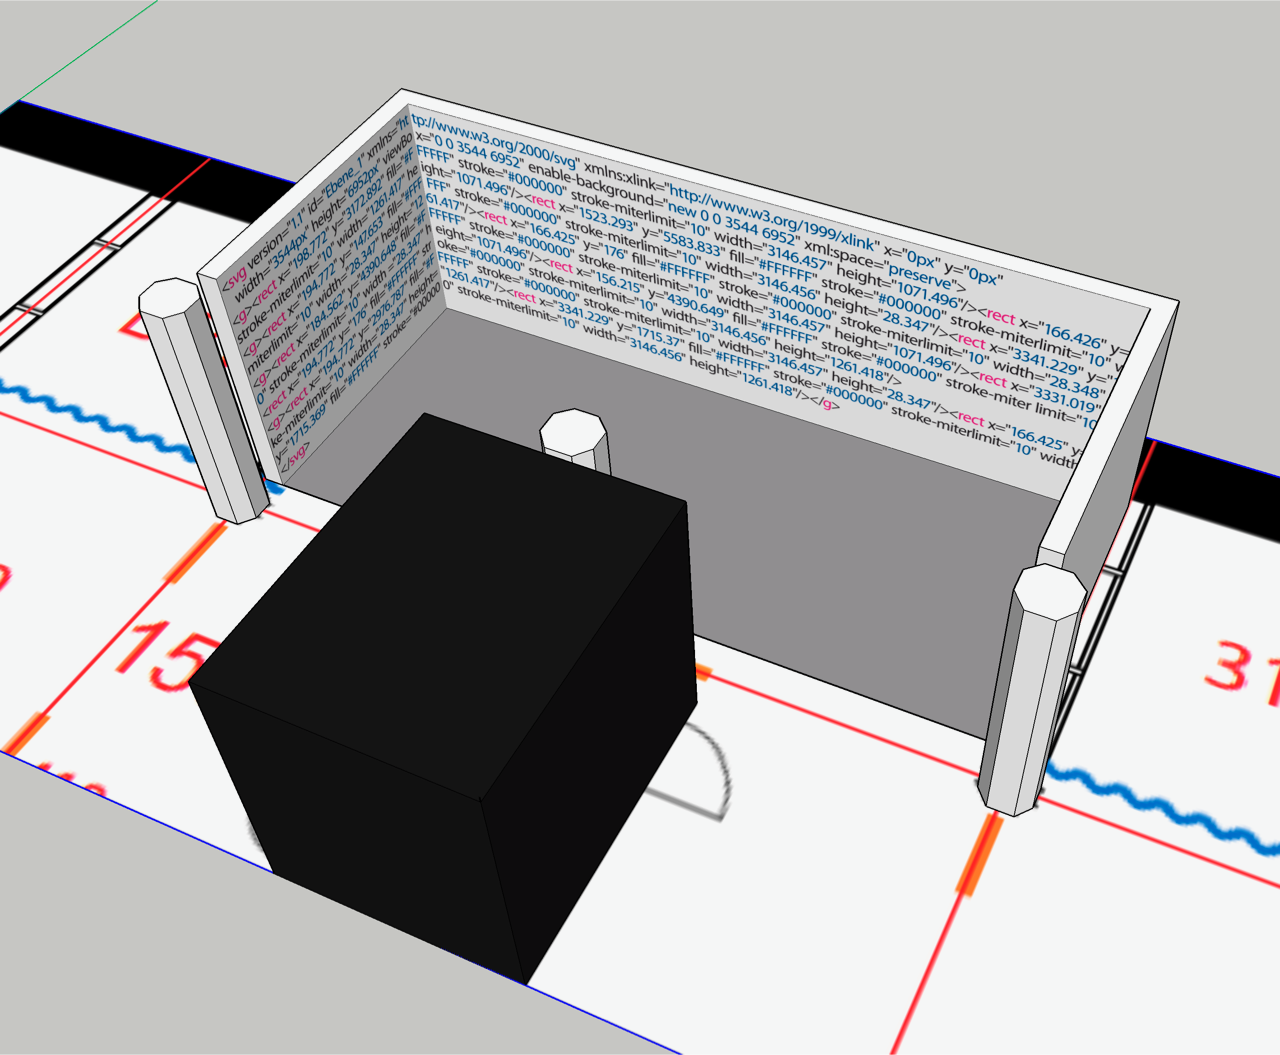 Simulation of an installation with computer code on three movable walls